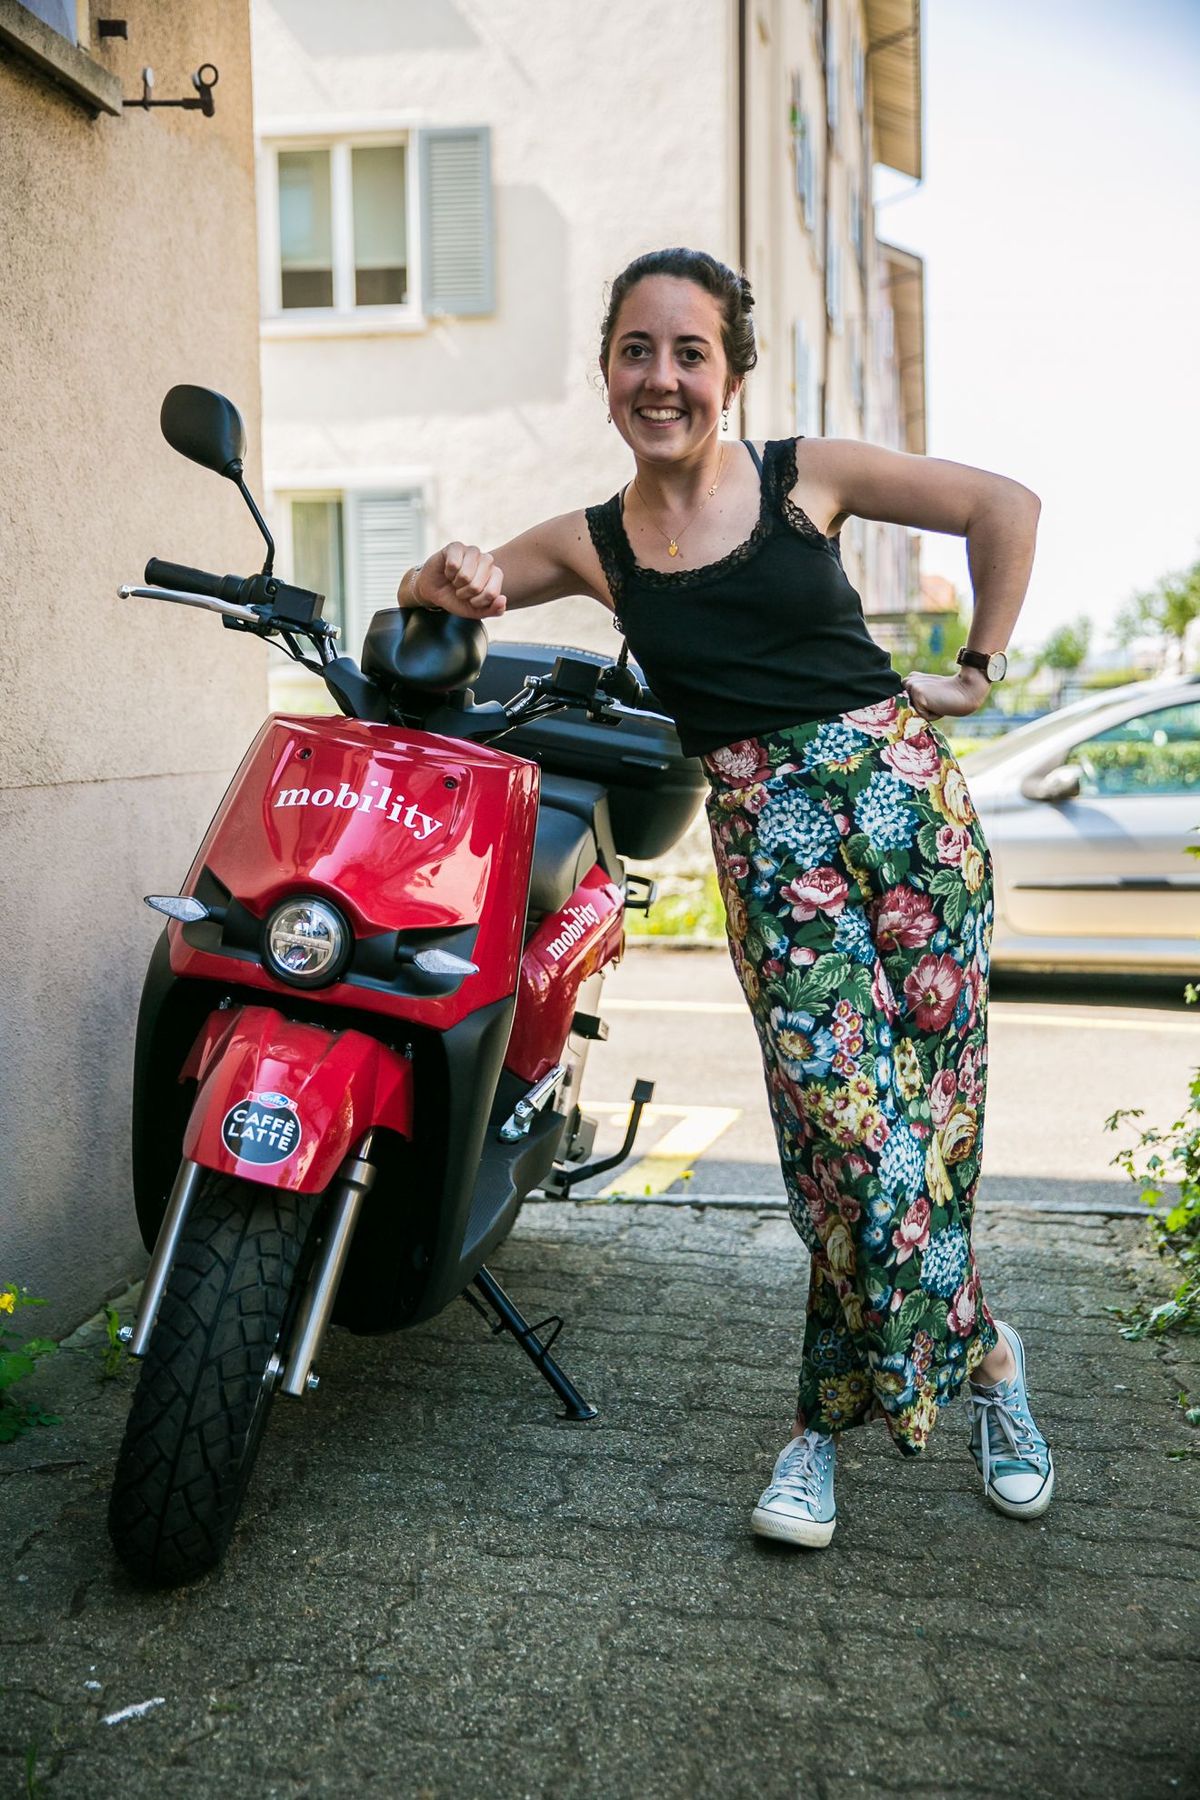 Article image for Nach Smide, Lime-Bike, oBike und Publibike bekommt Zürich endlich auch E-Scooter!